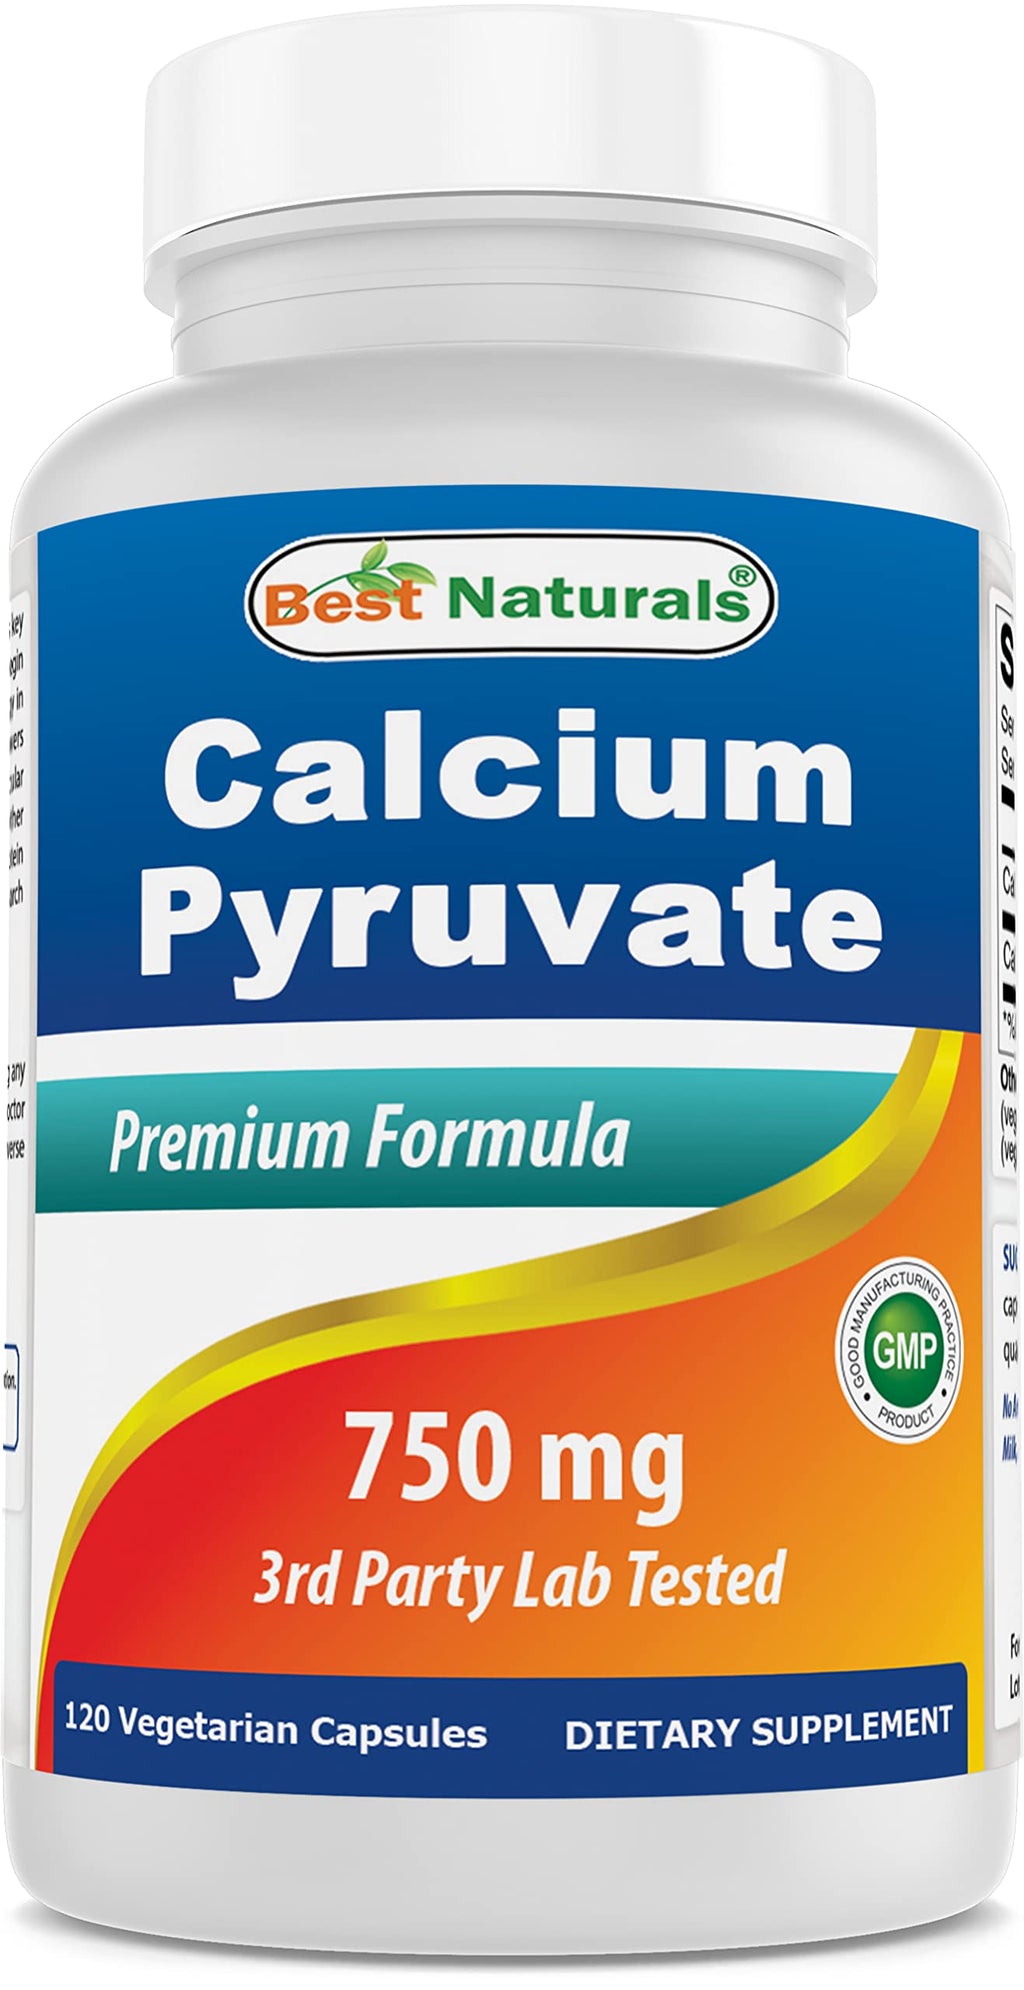 Best Naturals Calcium Pyruvate Fat-Burning Formula for Thighs, 750 mg 120 Capsules - Calcium pyruvate for Weight Loss - BeesActive Australia